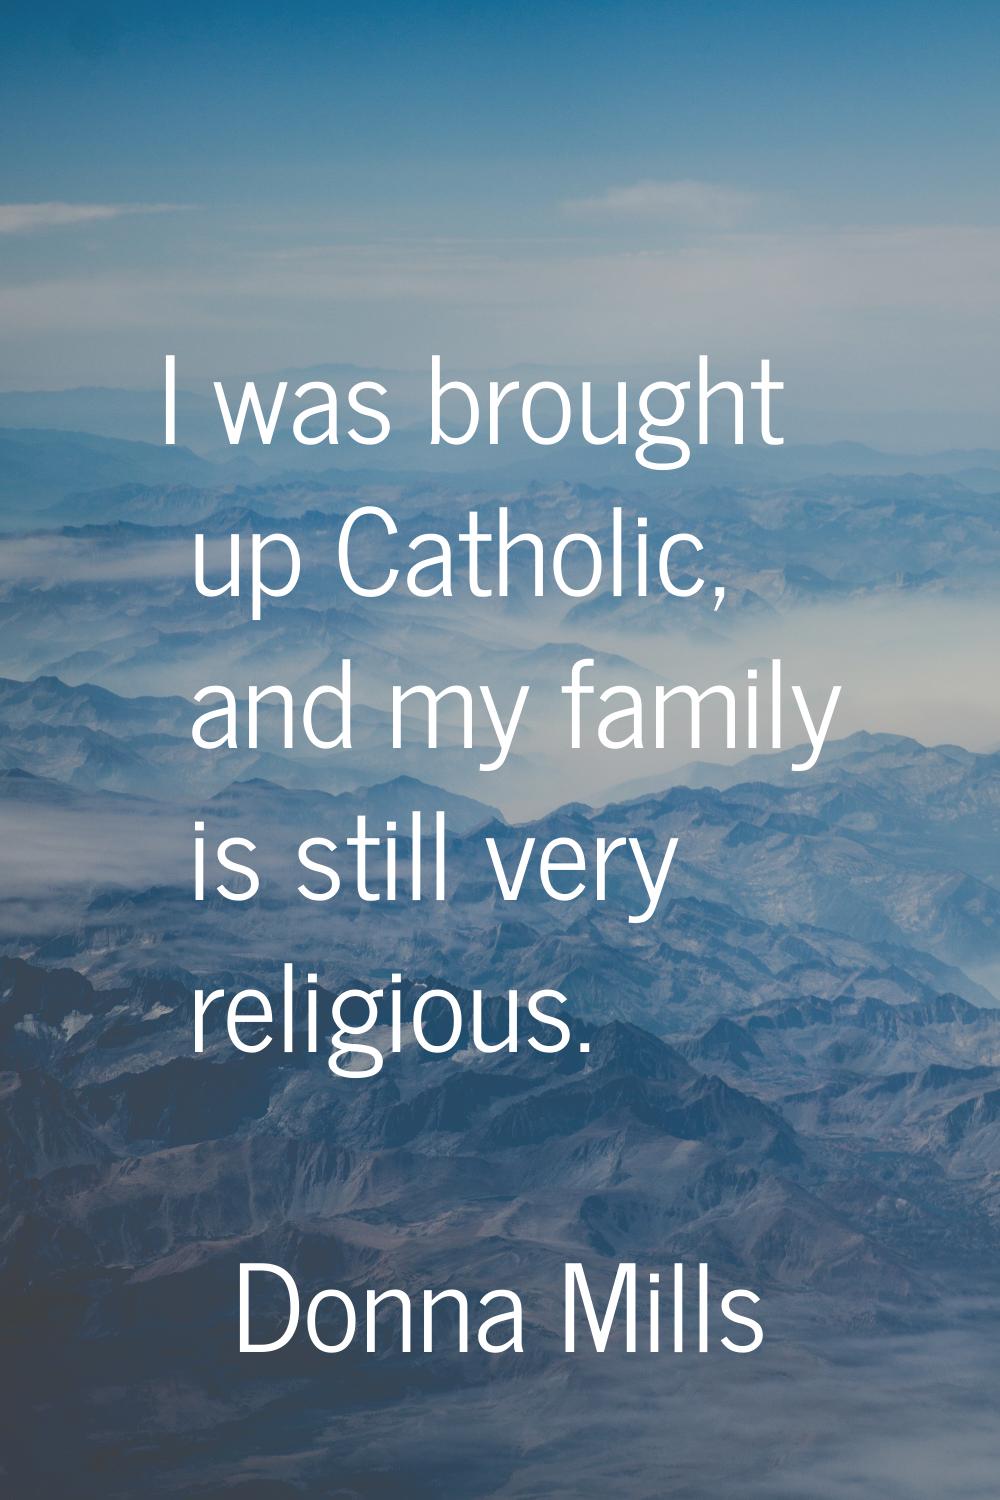 I was brought up Catholic, and my family is still very religious.